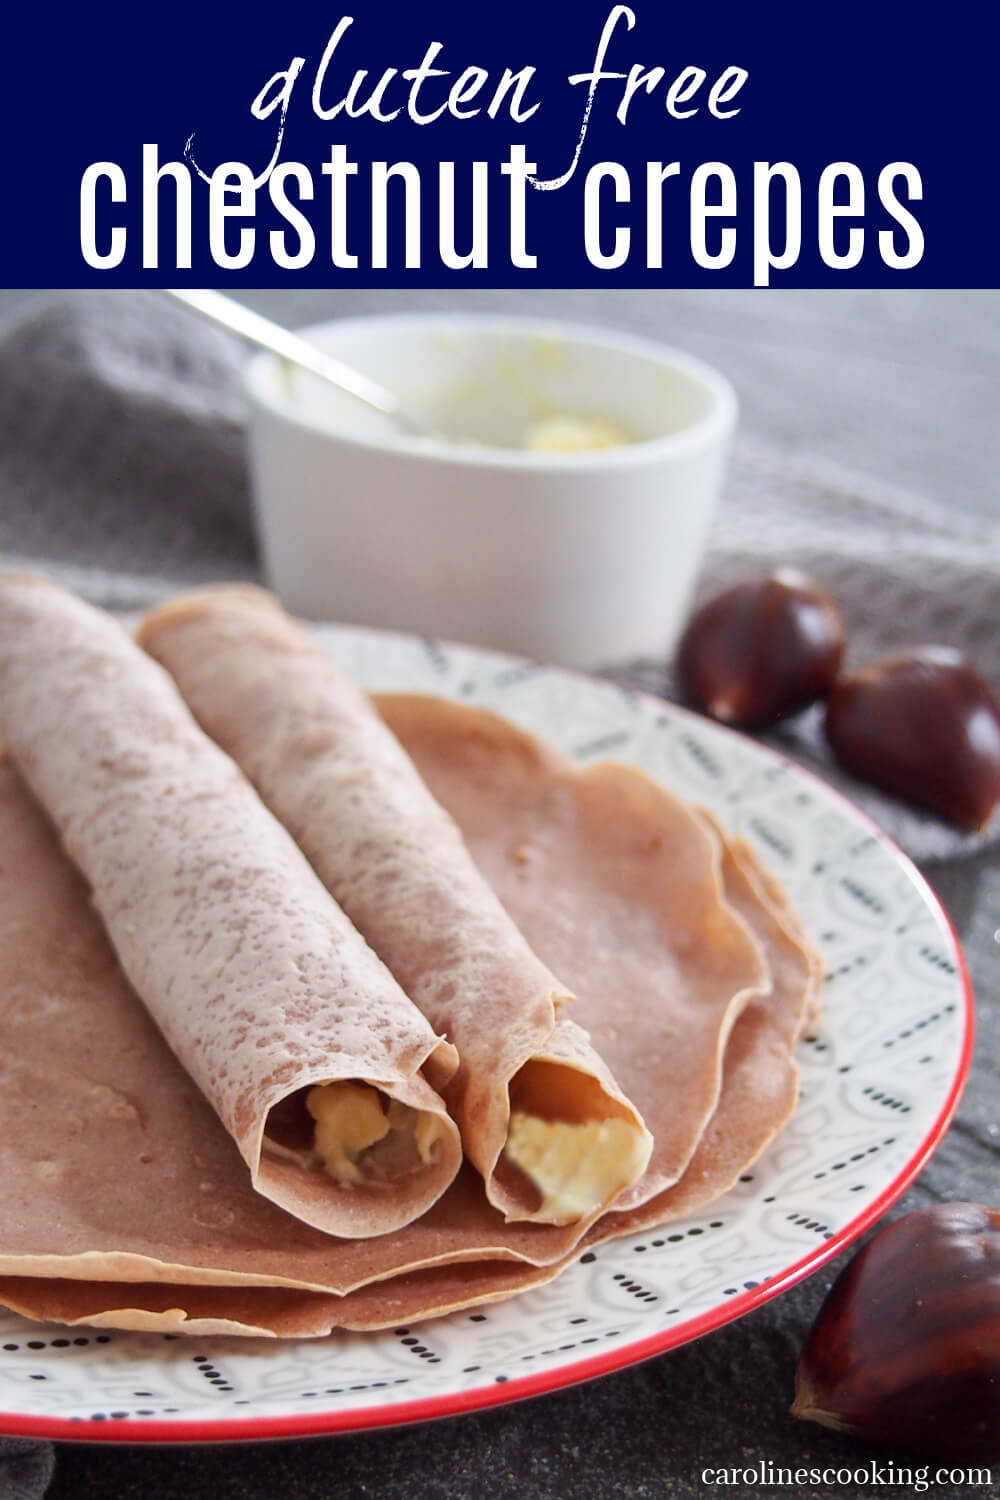 These chestnut crepes or pancakes are easy to make, naturally gluten-free and have a delicious, gently sweet nutty flavor.  The sweet and creamy honey mascarpone pairs perfectly to make a tasty snack, breakfast or even dessert.